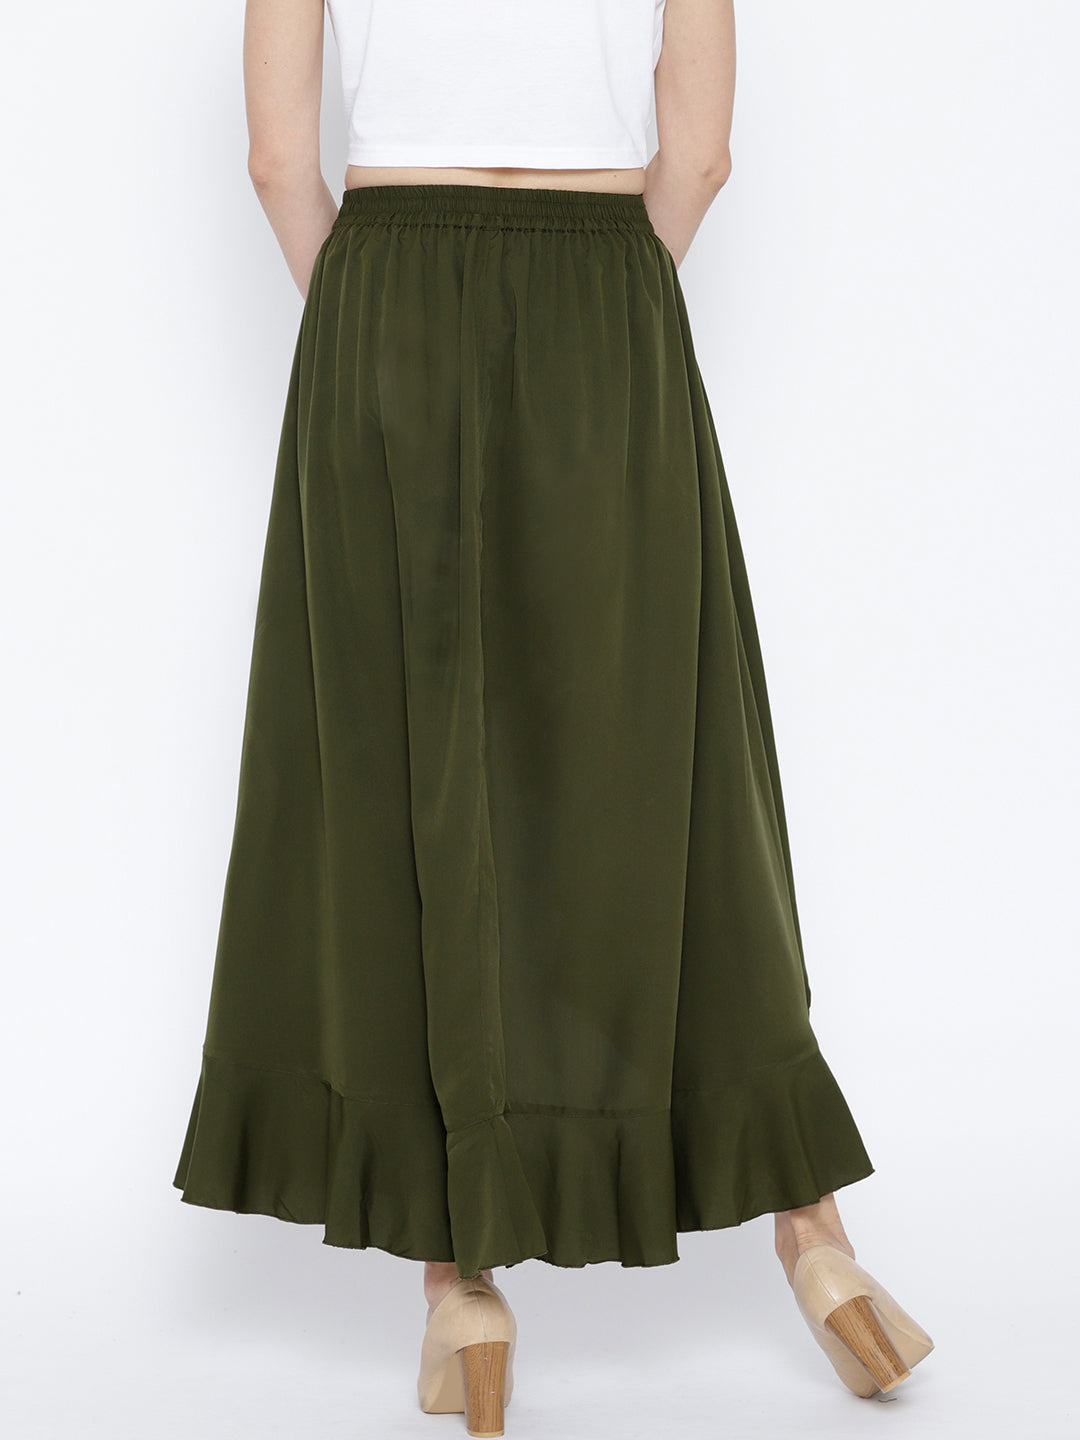 Olive Green Solid Ruffled Flared Maxi Skirt with Attached Trousers - Berrylush